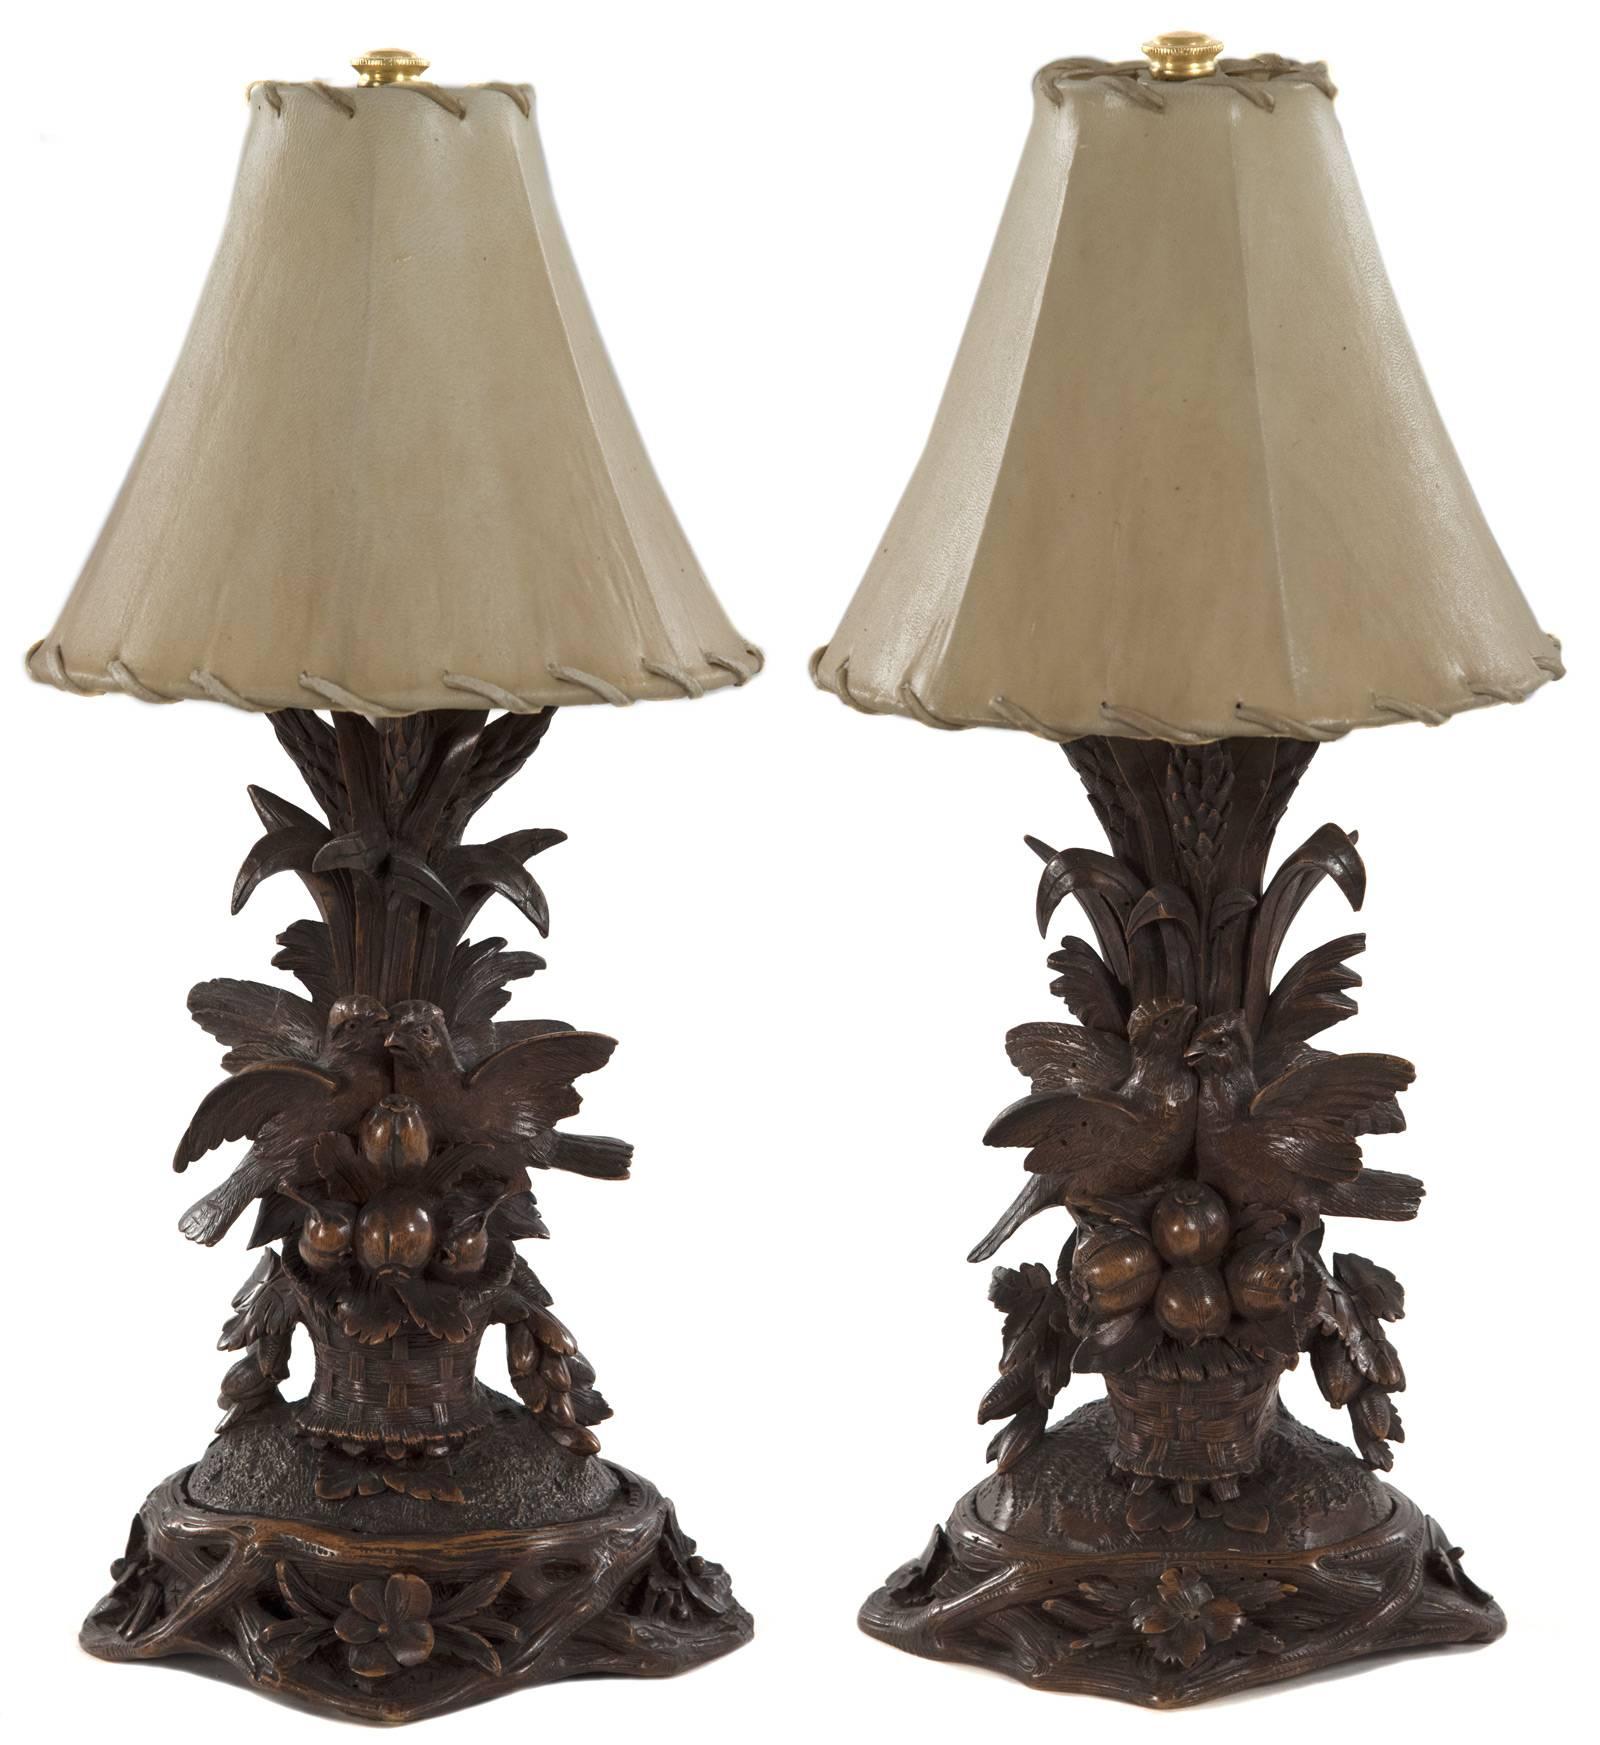 A pair of elaborately carved wood table lamps in the Black Forest style popular in the late 19th century. In front of tall stalks of grasses, pairs of birds are perched upon a small bushel of persimmons and foliage that sits within a woven basket on